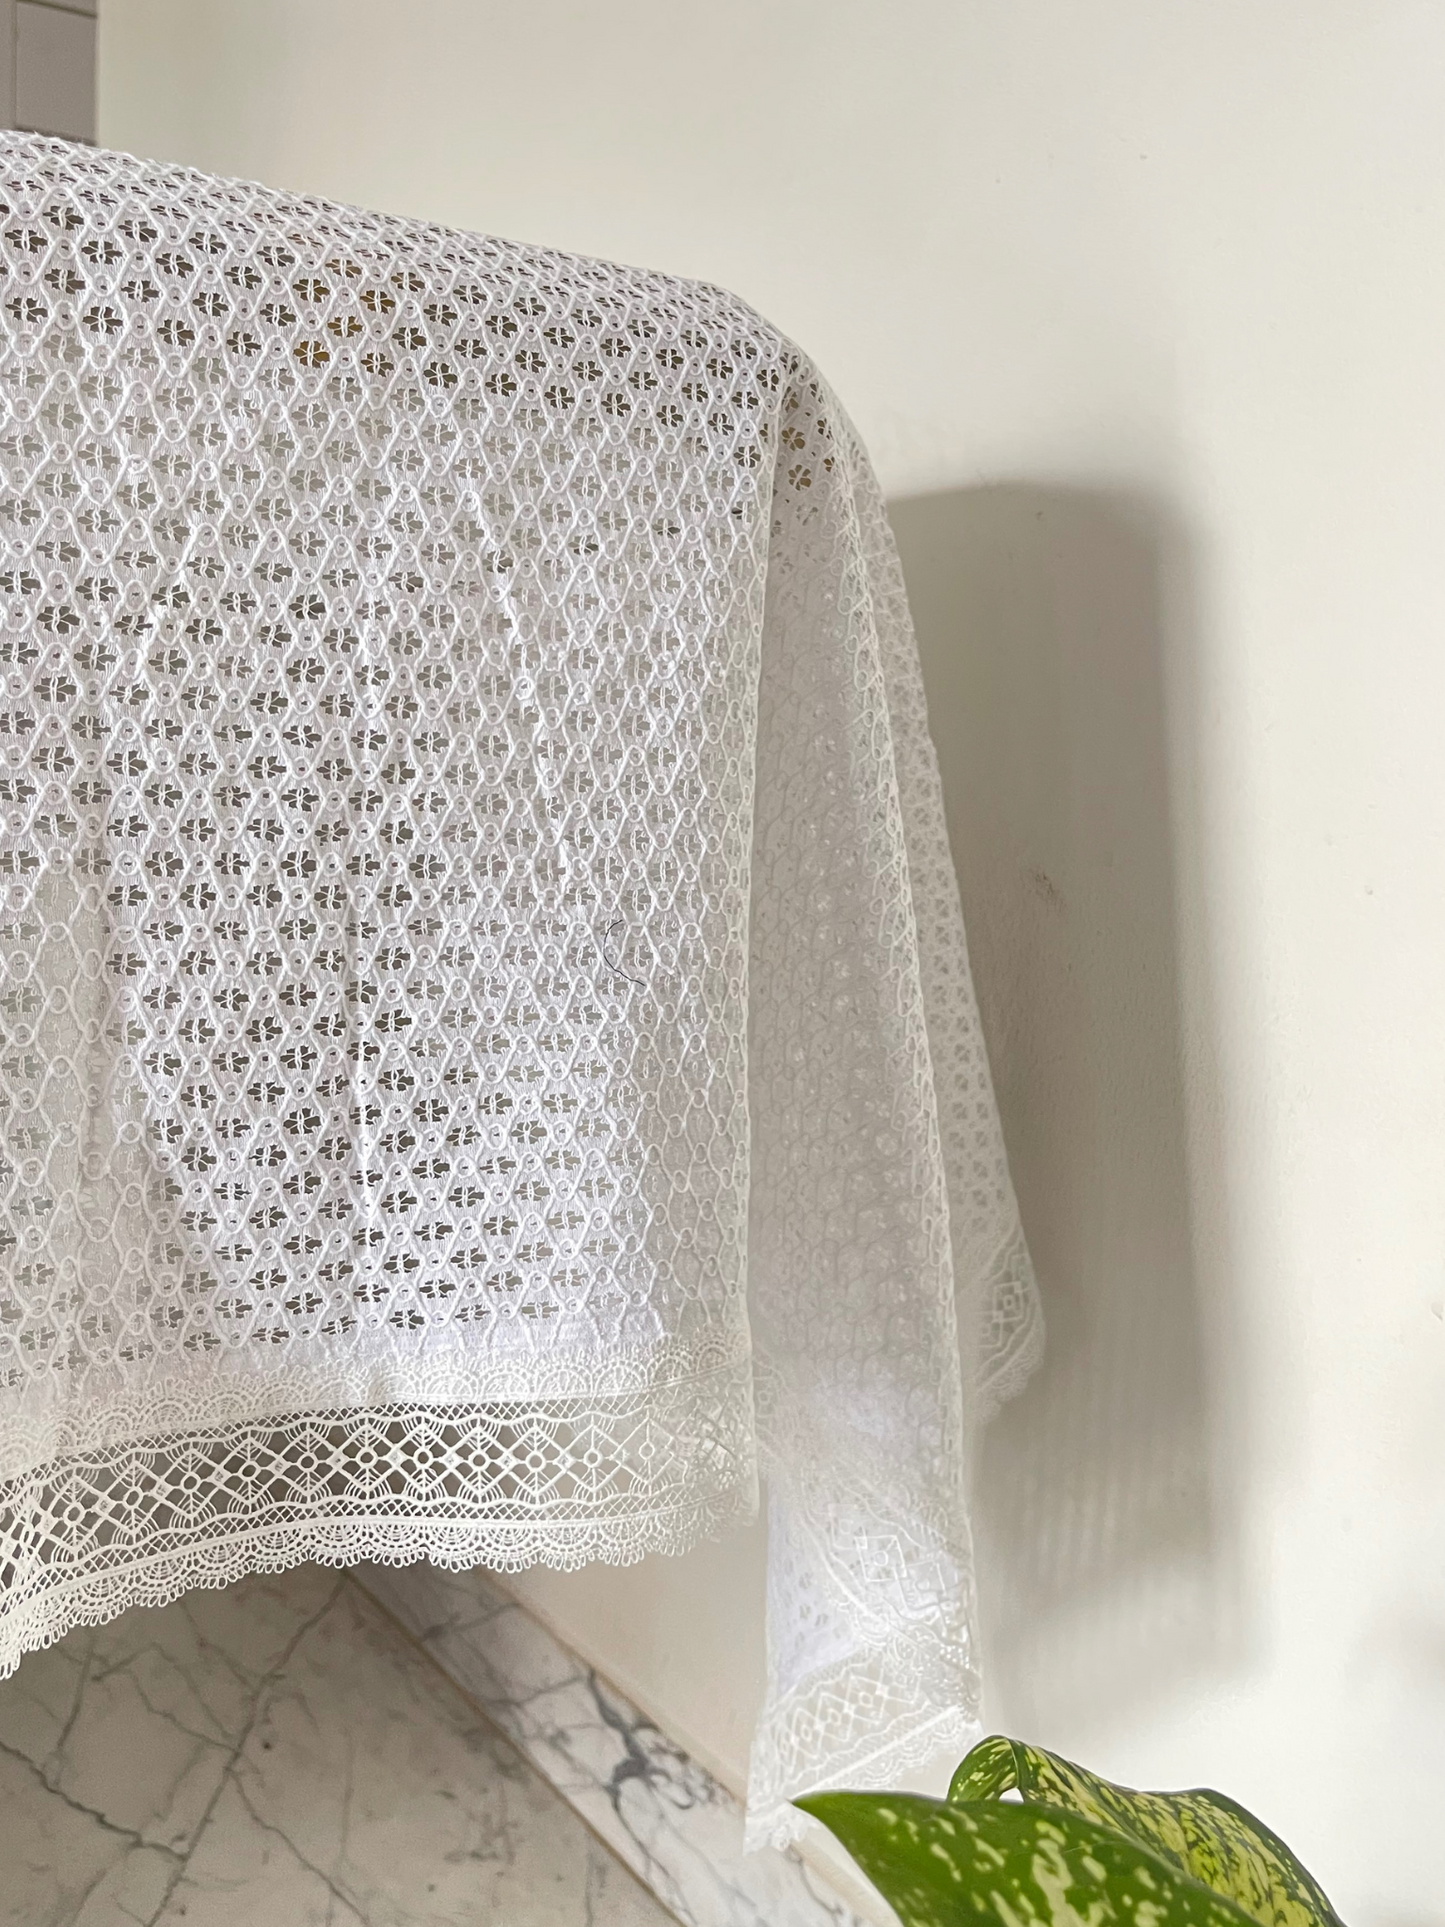 dining table covers in unique net and lace design